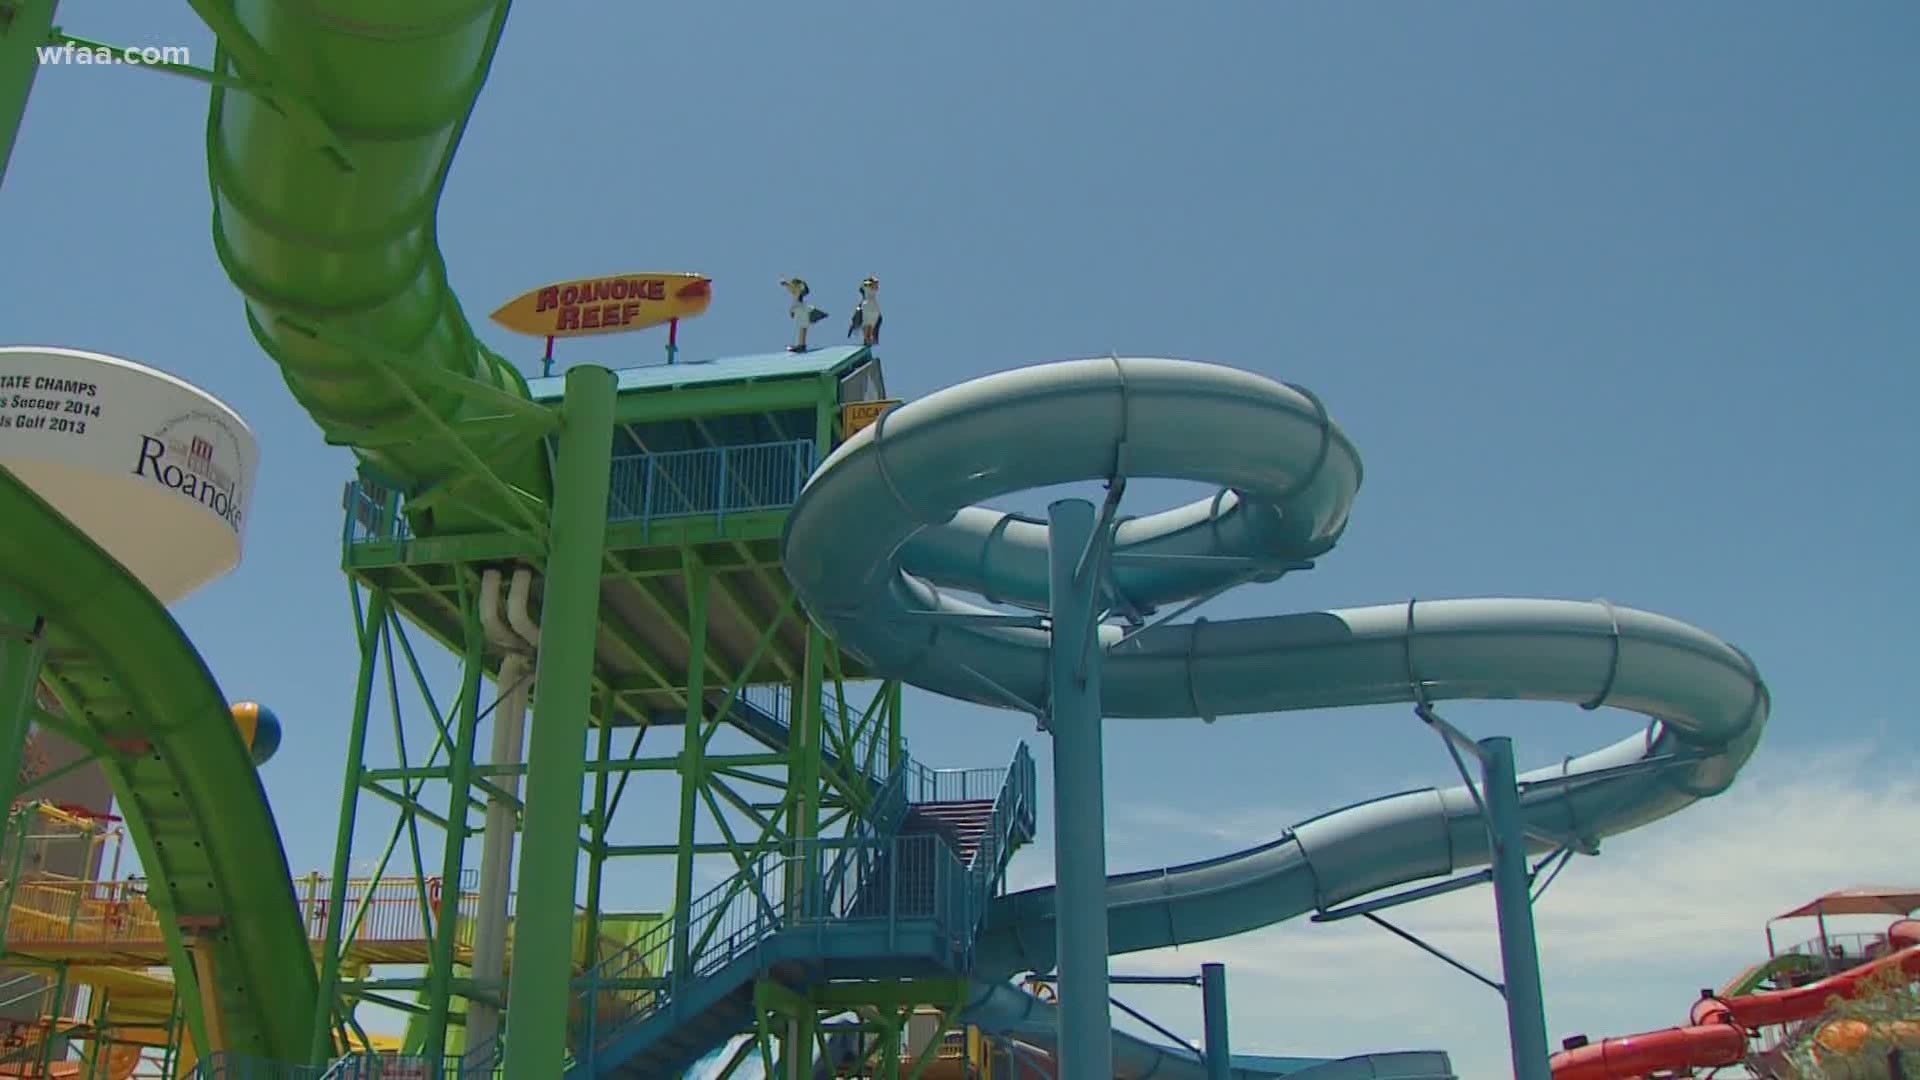 Some Texas water parks are planning to reopen May 29. Here’s what you need to know if you’re worried about getting a ticket or getting into the water.